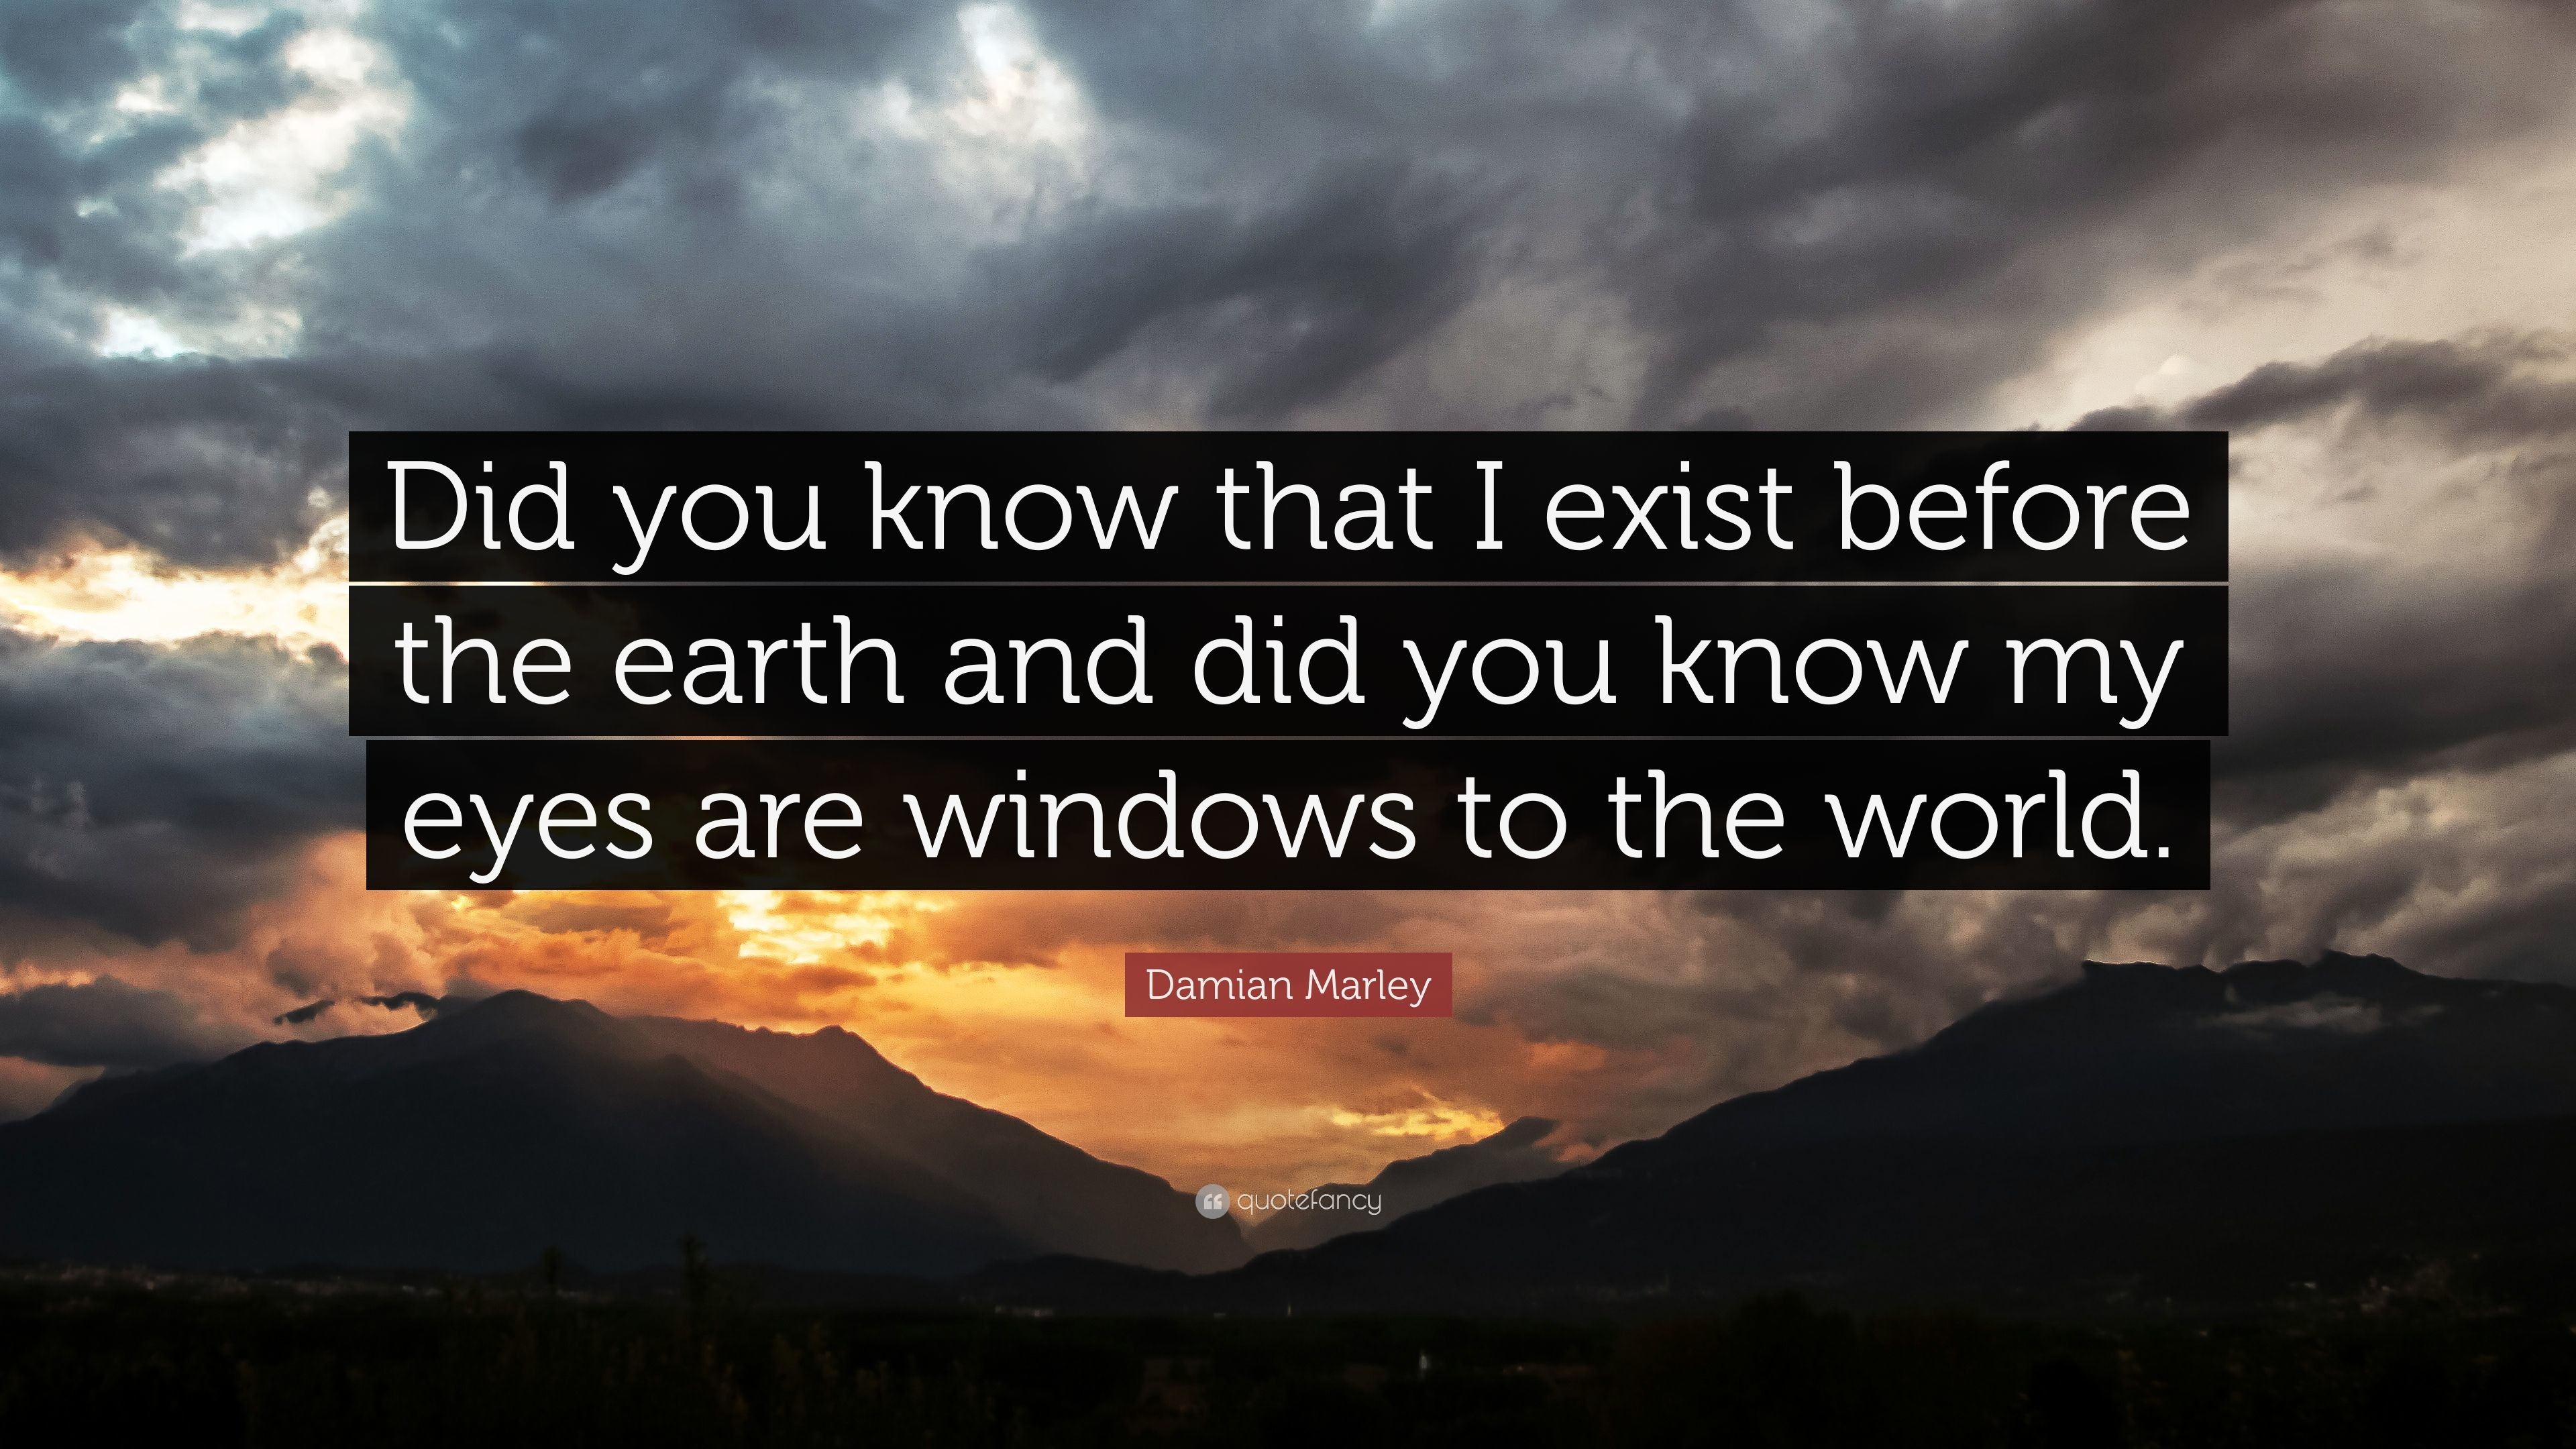 3840x2160 Damian Marley Quote: “Did you know that I exist before the earth and did